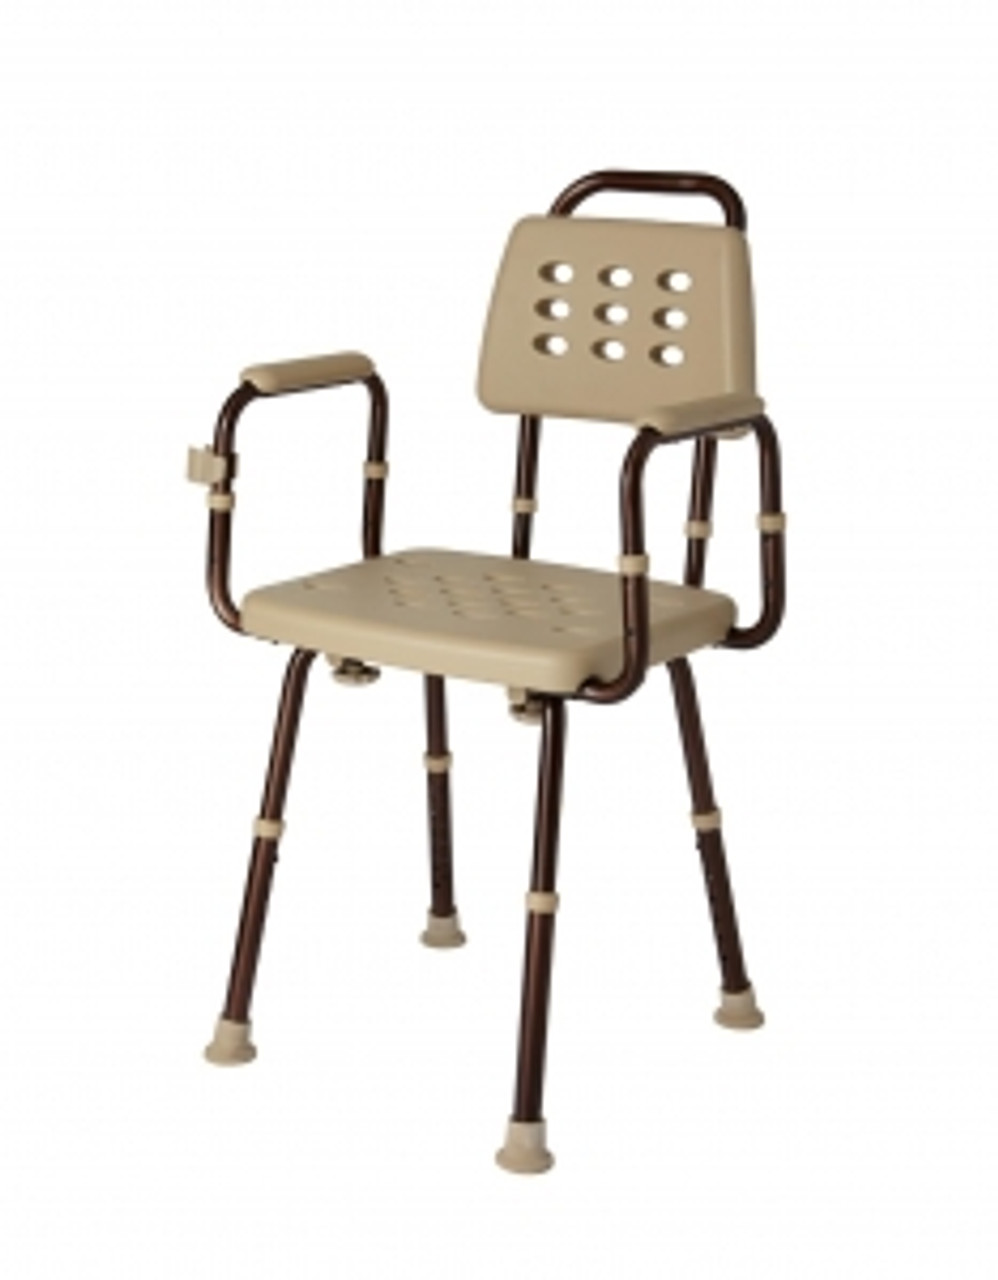 Elements shower chair with Microban* antimicrobial treatment
350 lb. weight capacity, seat height 15"-21", seat depth 15"
Comes in retail packaging

*This product has antimicrobial properties built in to protect the product. The product does not protect users or others against bacteria, viruses, germs or other disease-causing organisms.